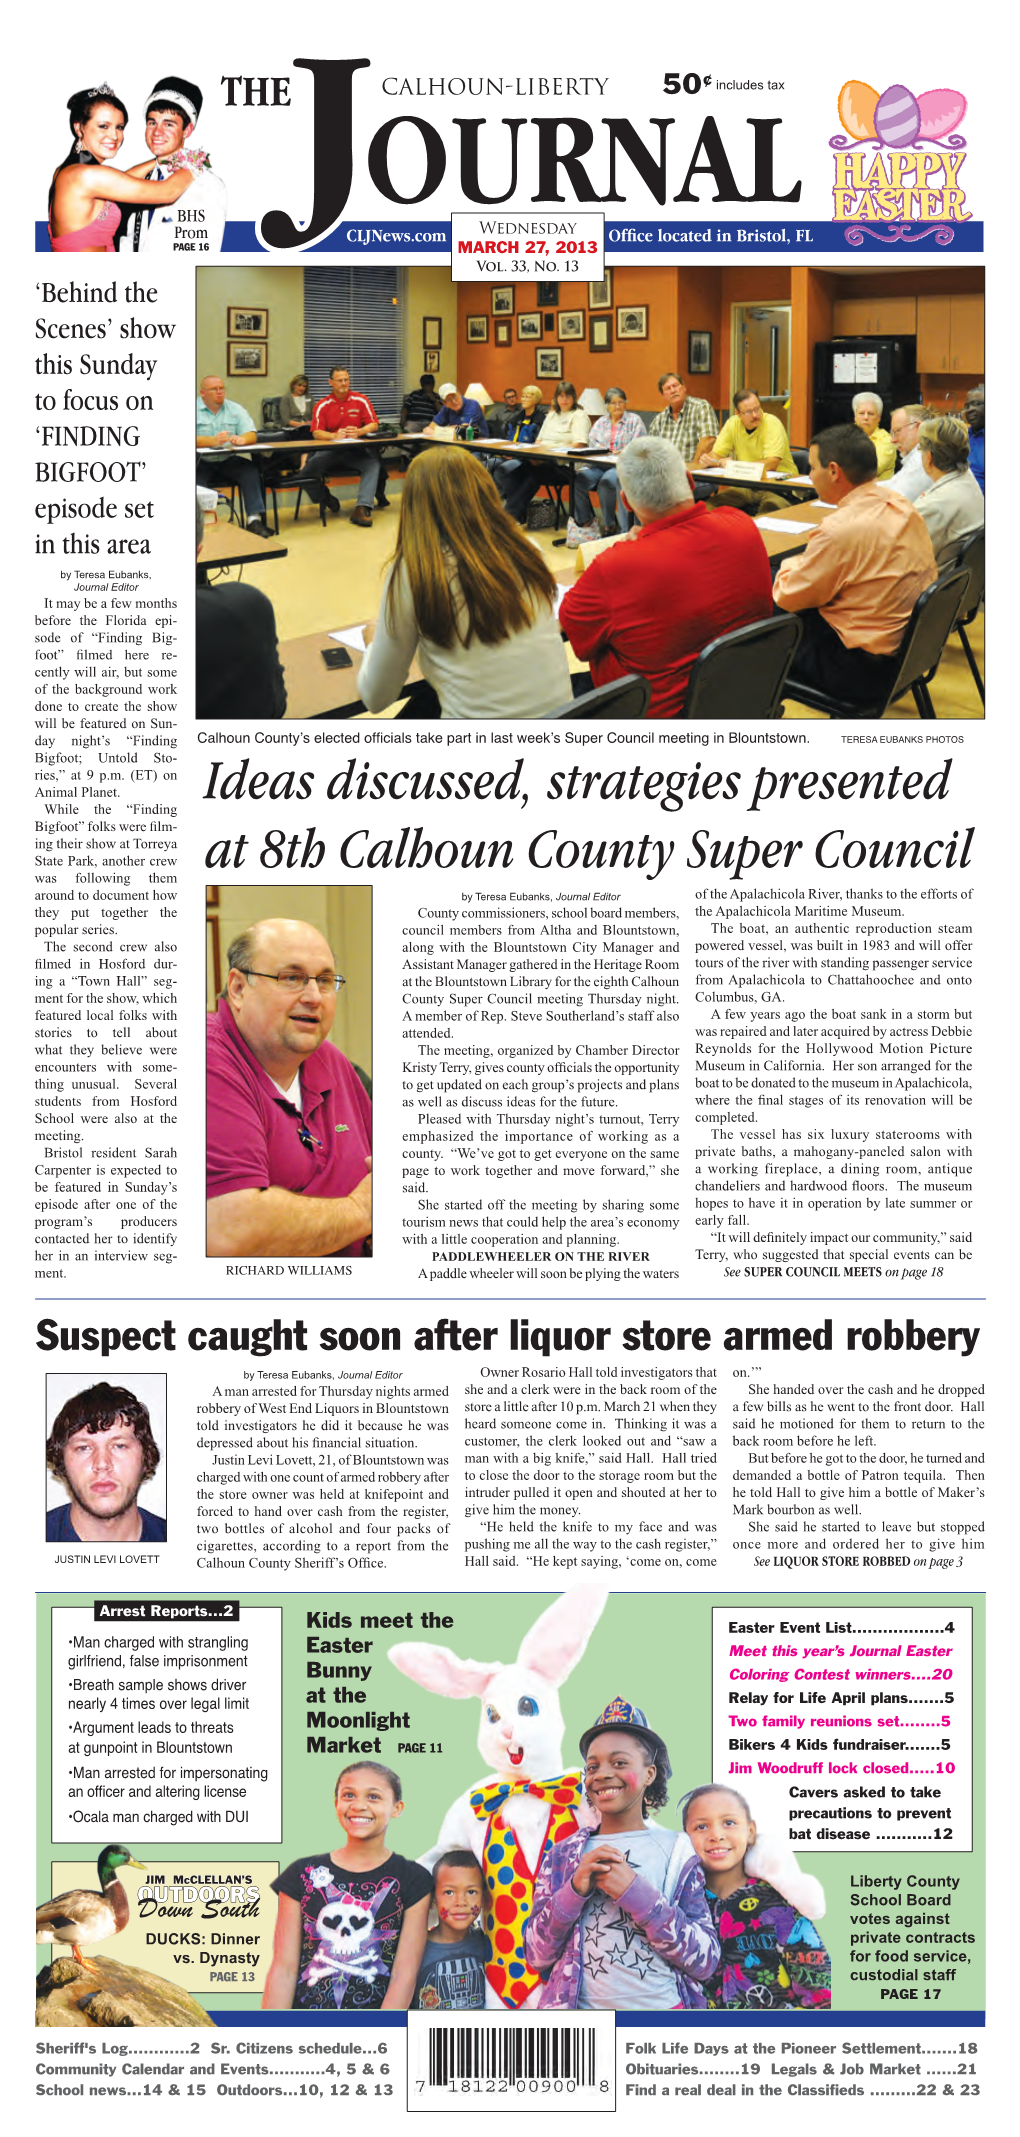 Ideas Discussed, Strategies Presented at 8Th Calhoun County Super Council